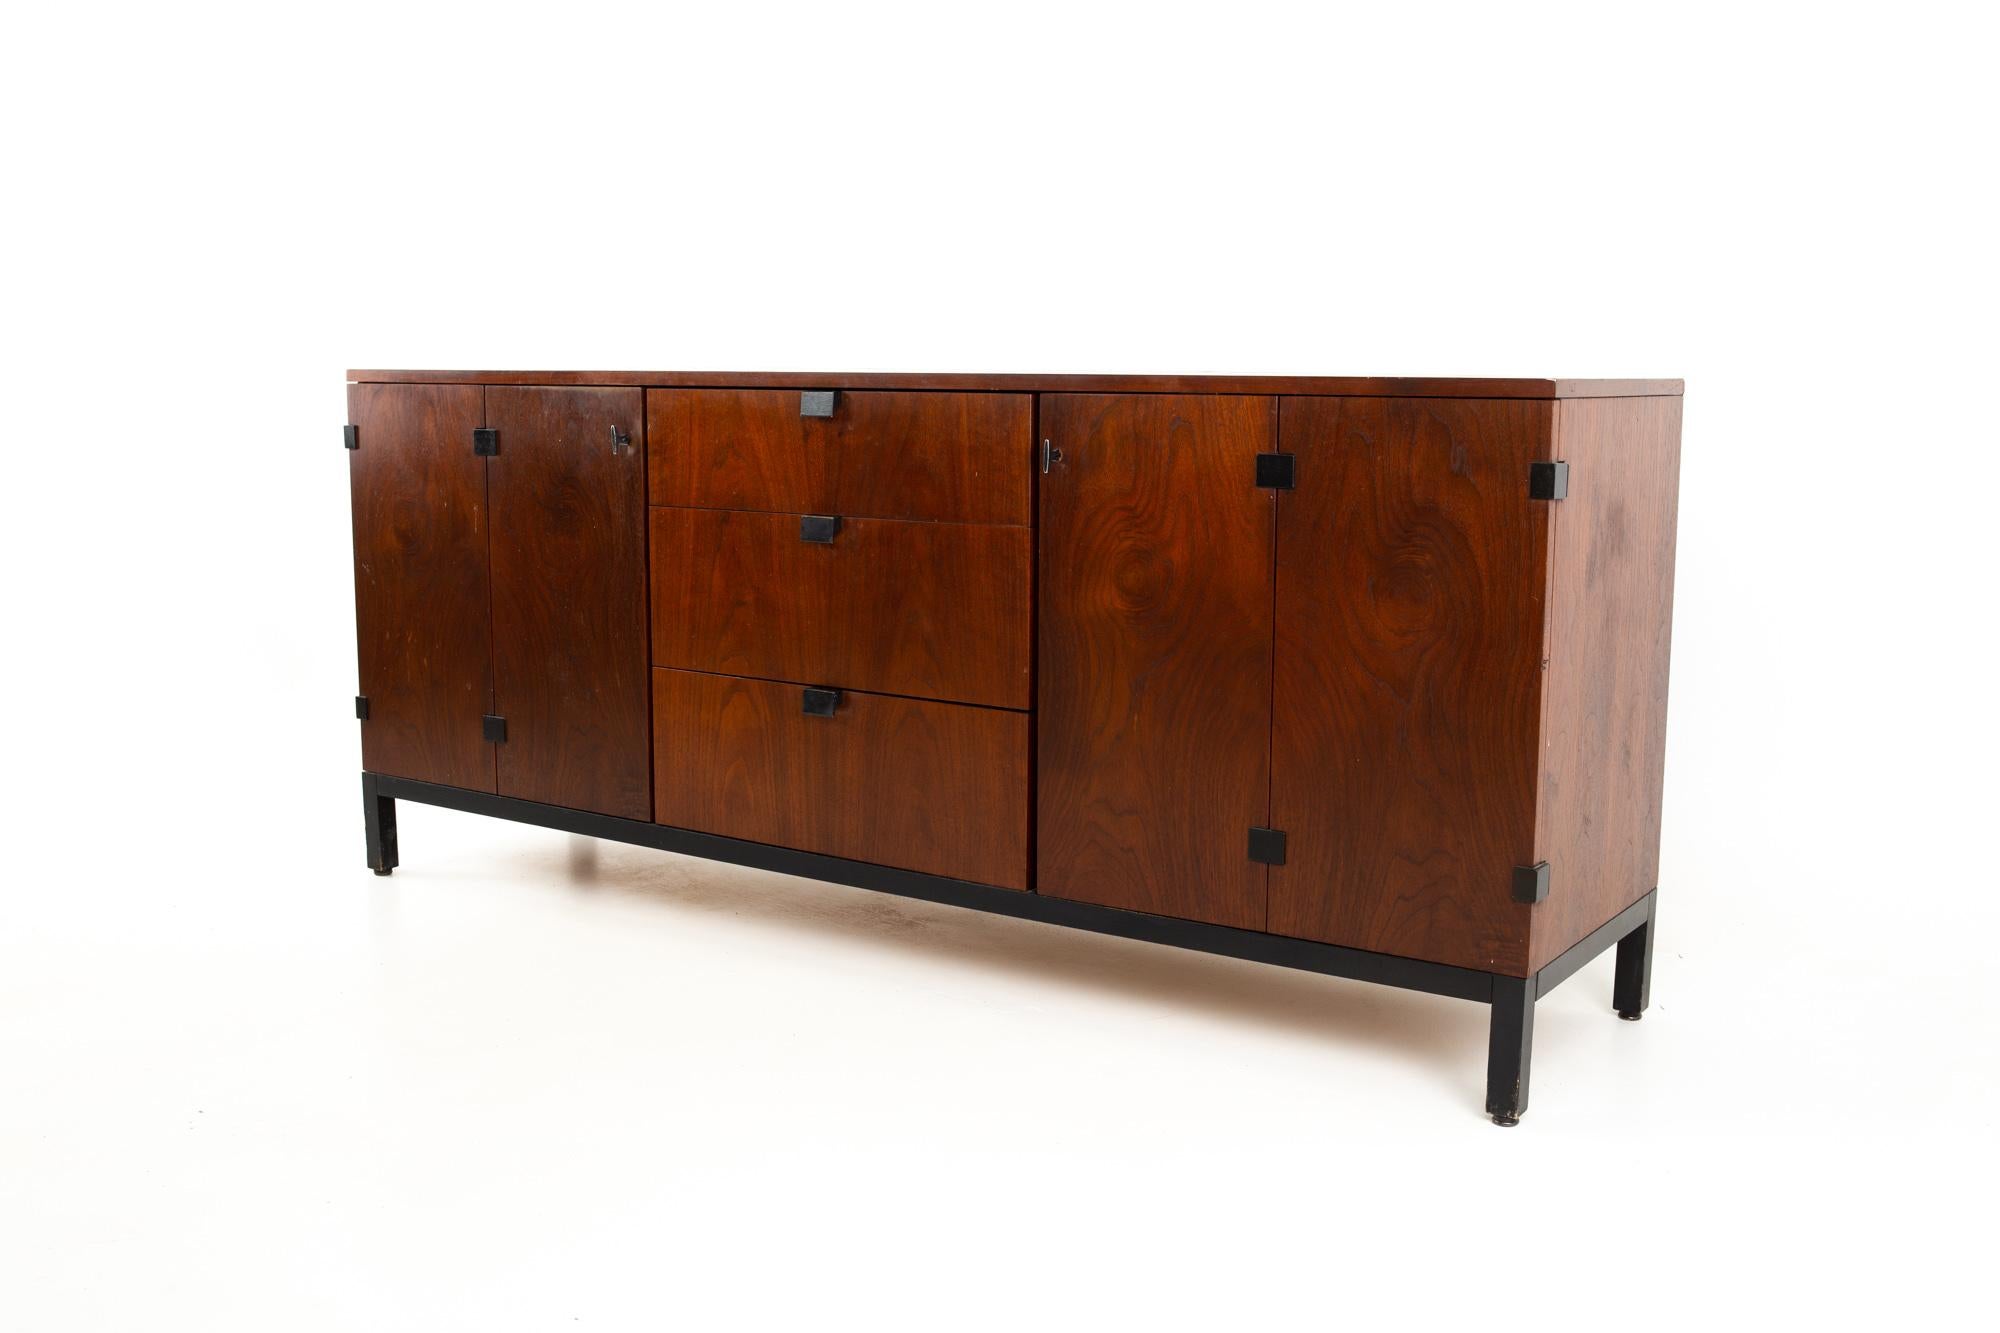 Milo Baughman for Directional midcentury walnut 9-drawer lowboy dresser sideboard credenza
Credenza measures: 72 wide x 18.25 deep x 30.5 inches high

All pieces of furniture can be had in what we call restored vintage condition. That means the